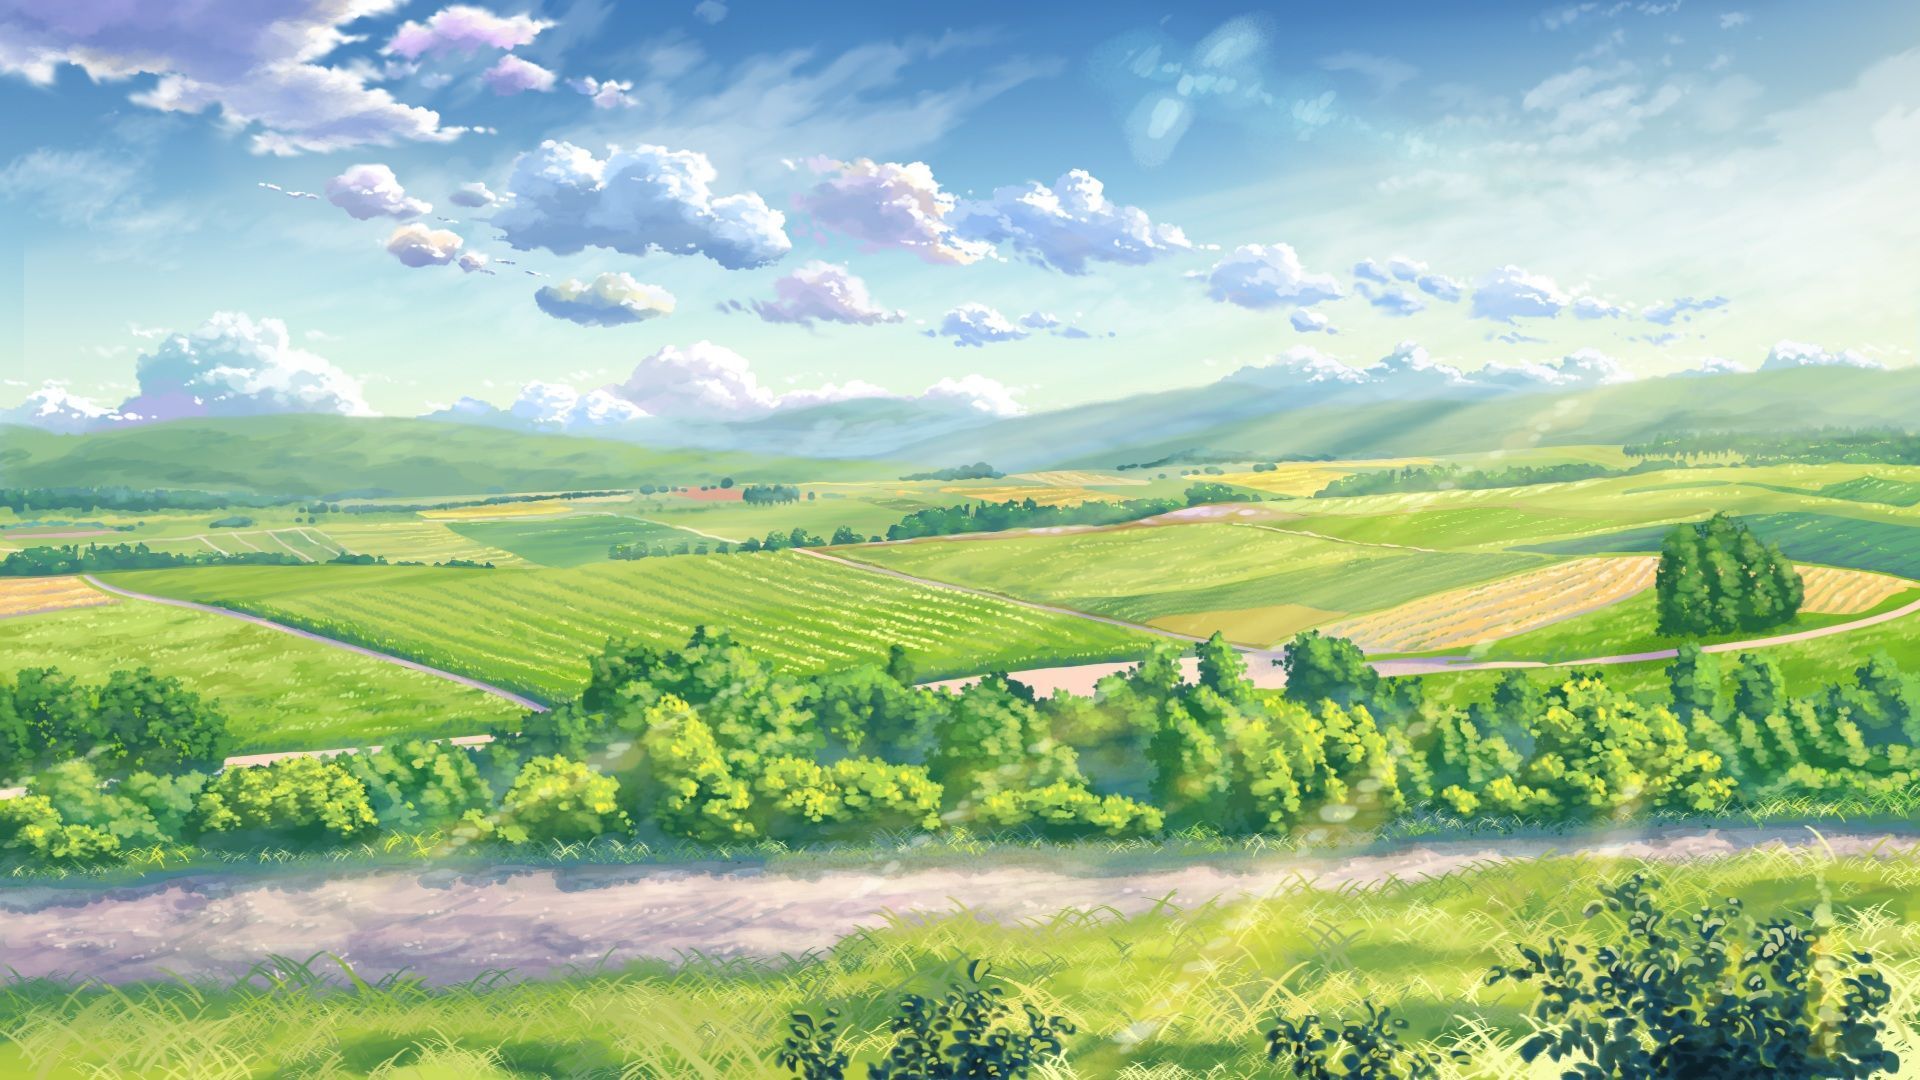 A painting of green fields and trees - Anime landscape, farm